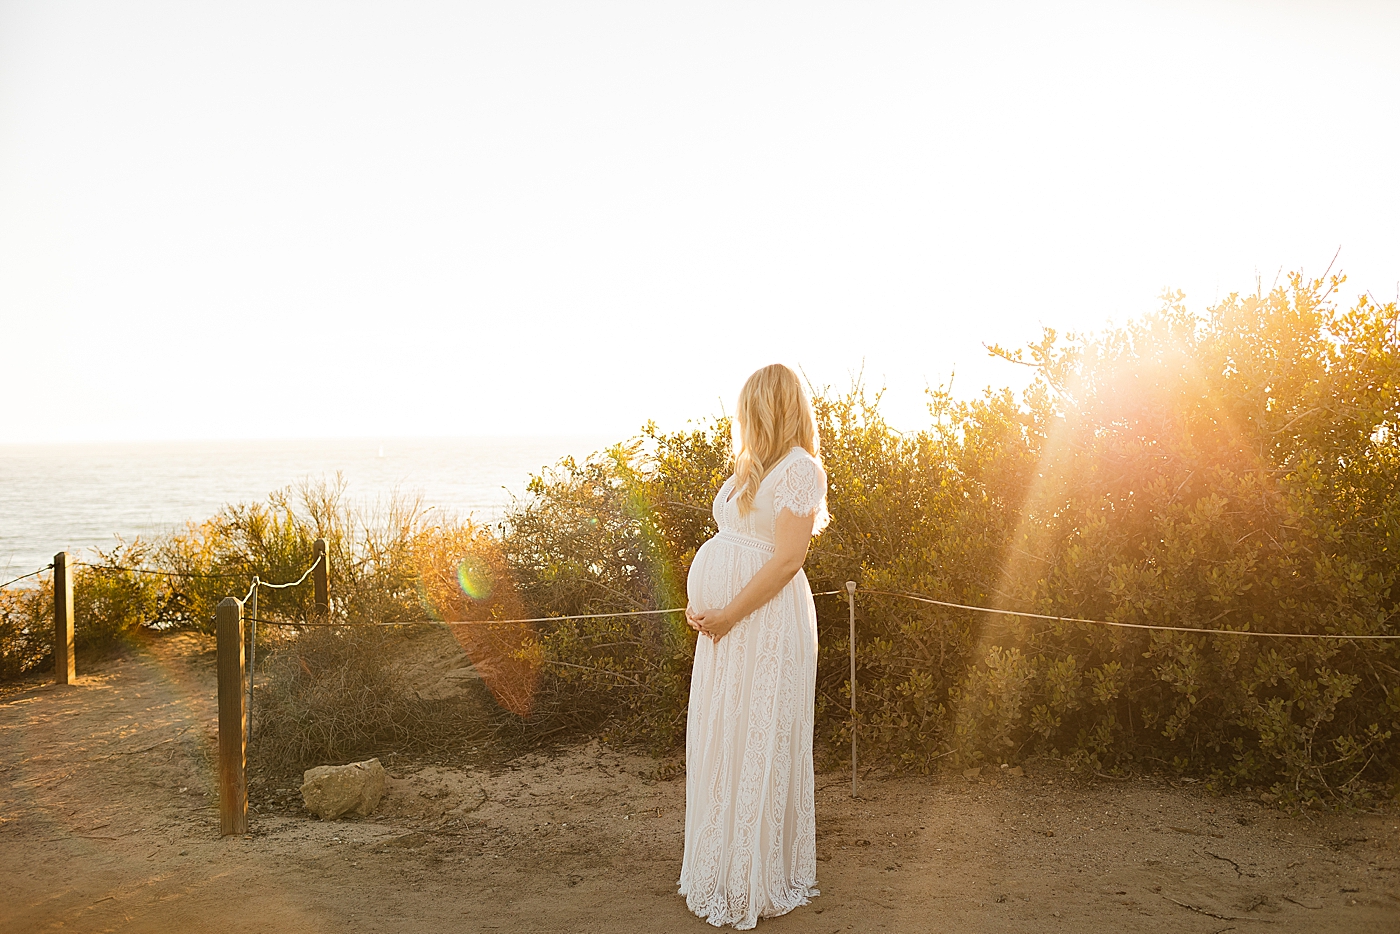 during their Orange County Maternity Session | Image by Halleigh Hill 